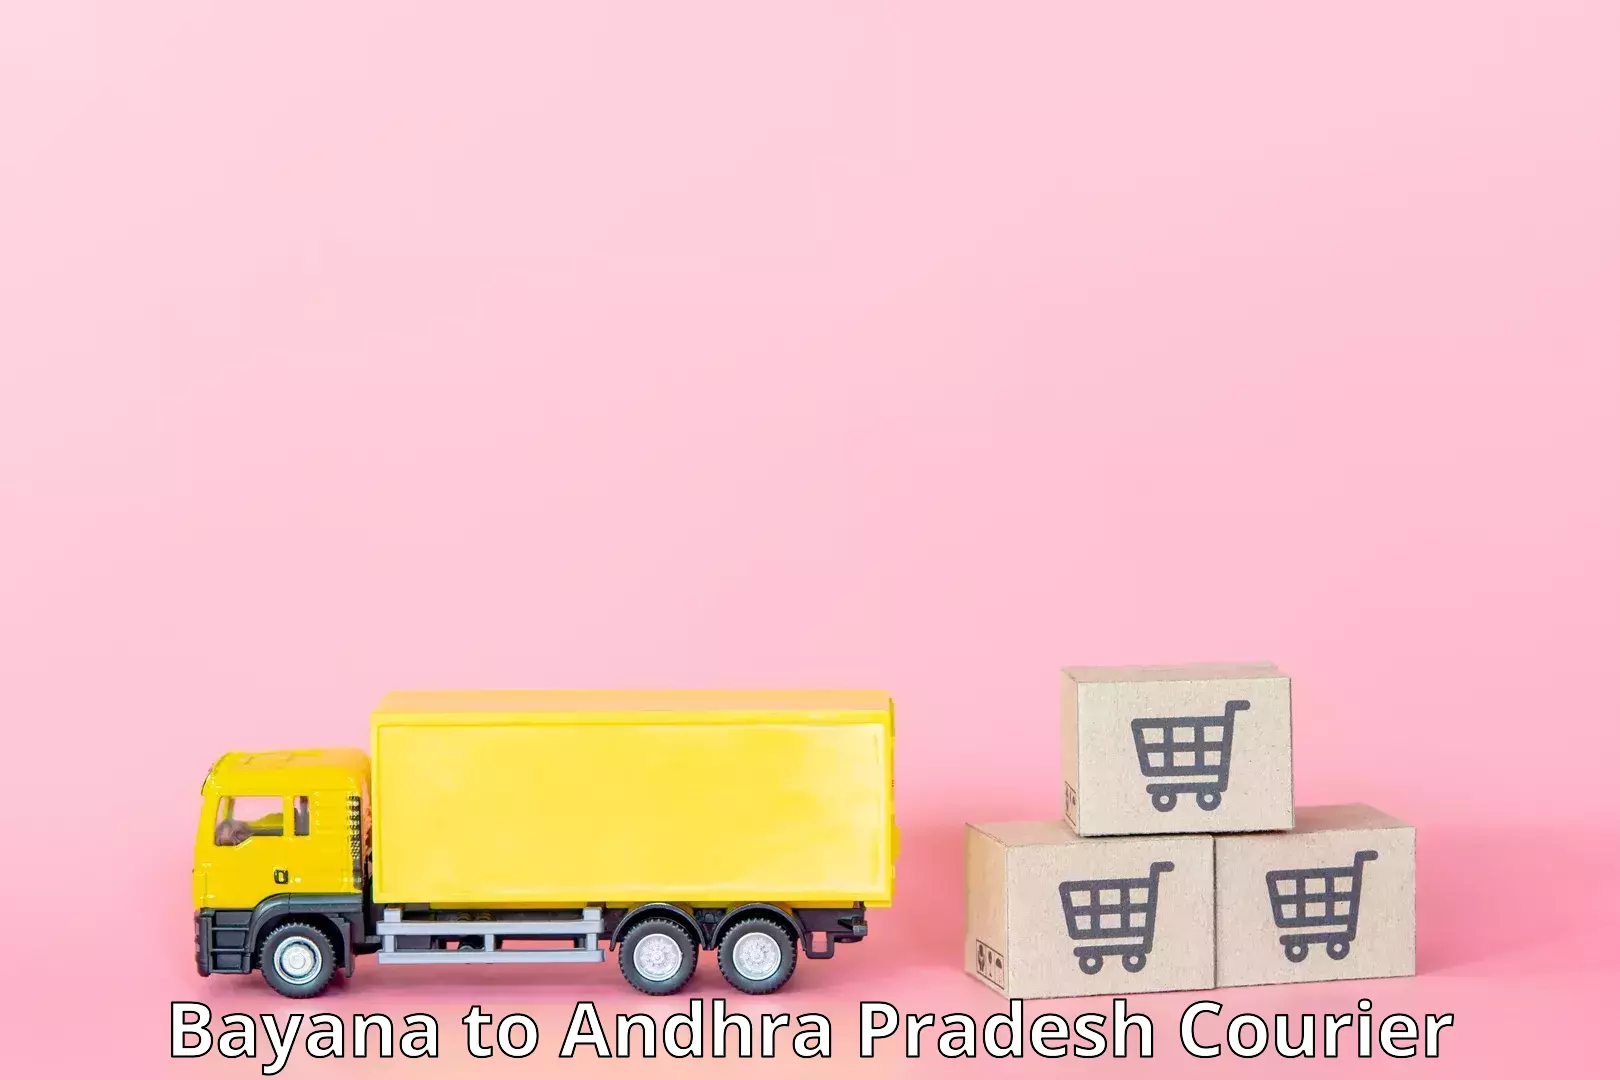 Overnight delivery services Bayana to Andhra Pradesh